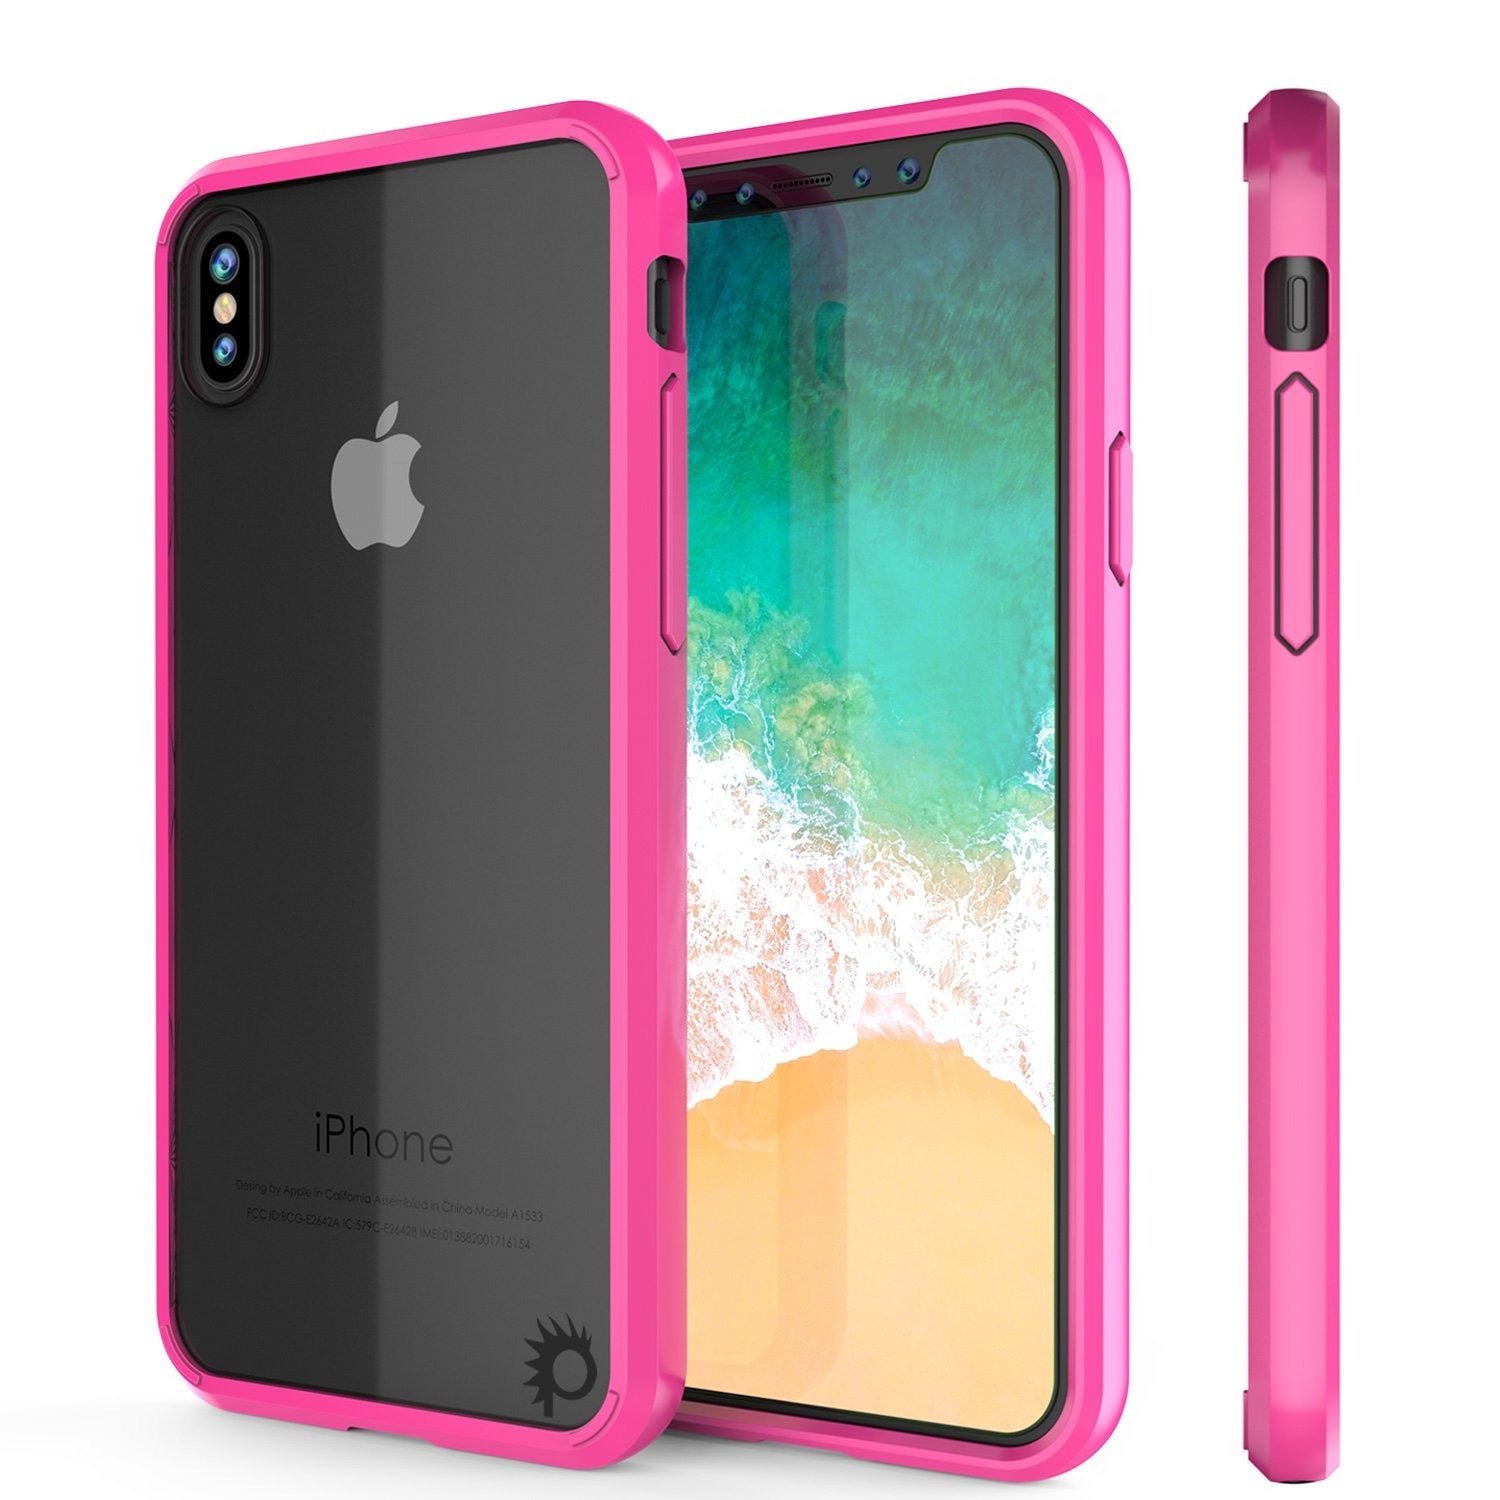 iPhone X Case, PUNKcase [LUCID 2.0 Series] [Slim Fit] Armor Cover W/Integrated Anti-Shock System [Pink]